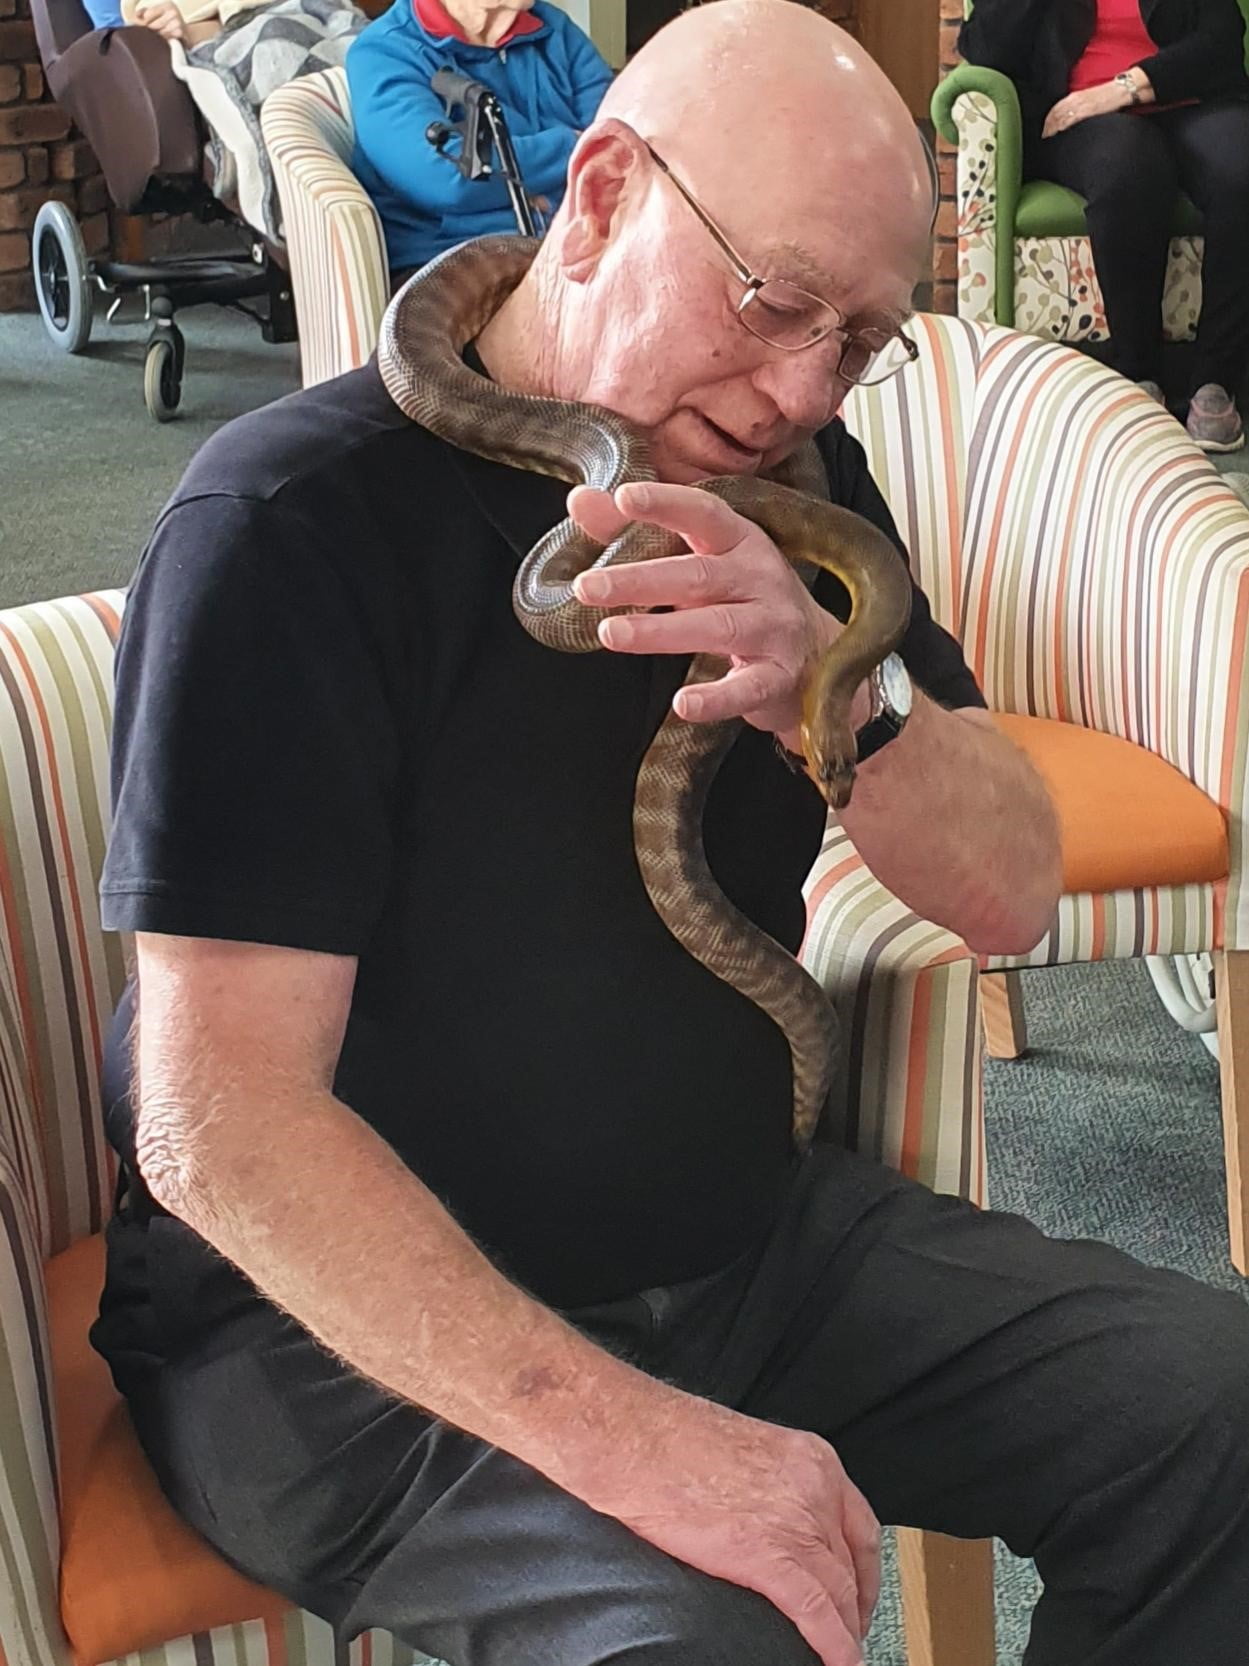 World Snake Day,Activities in Aged Care, aged care geelong, aged care lifestyle program, aged care melbourne, Incursion in Aged Care, pets in aged care, Snakes, Visiting Snakes, World Snake Day